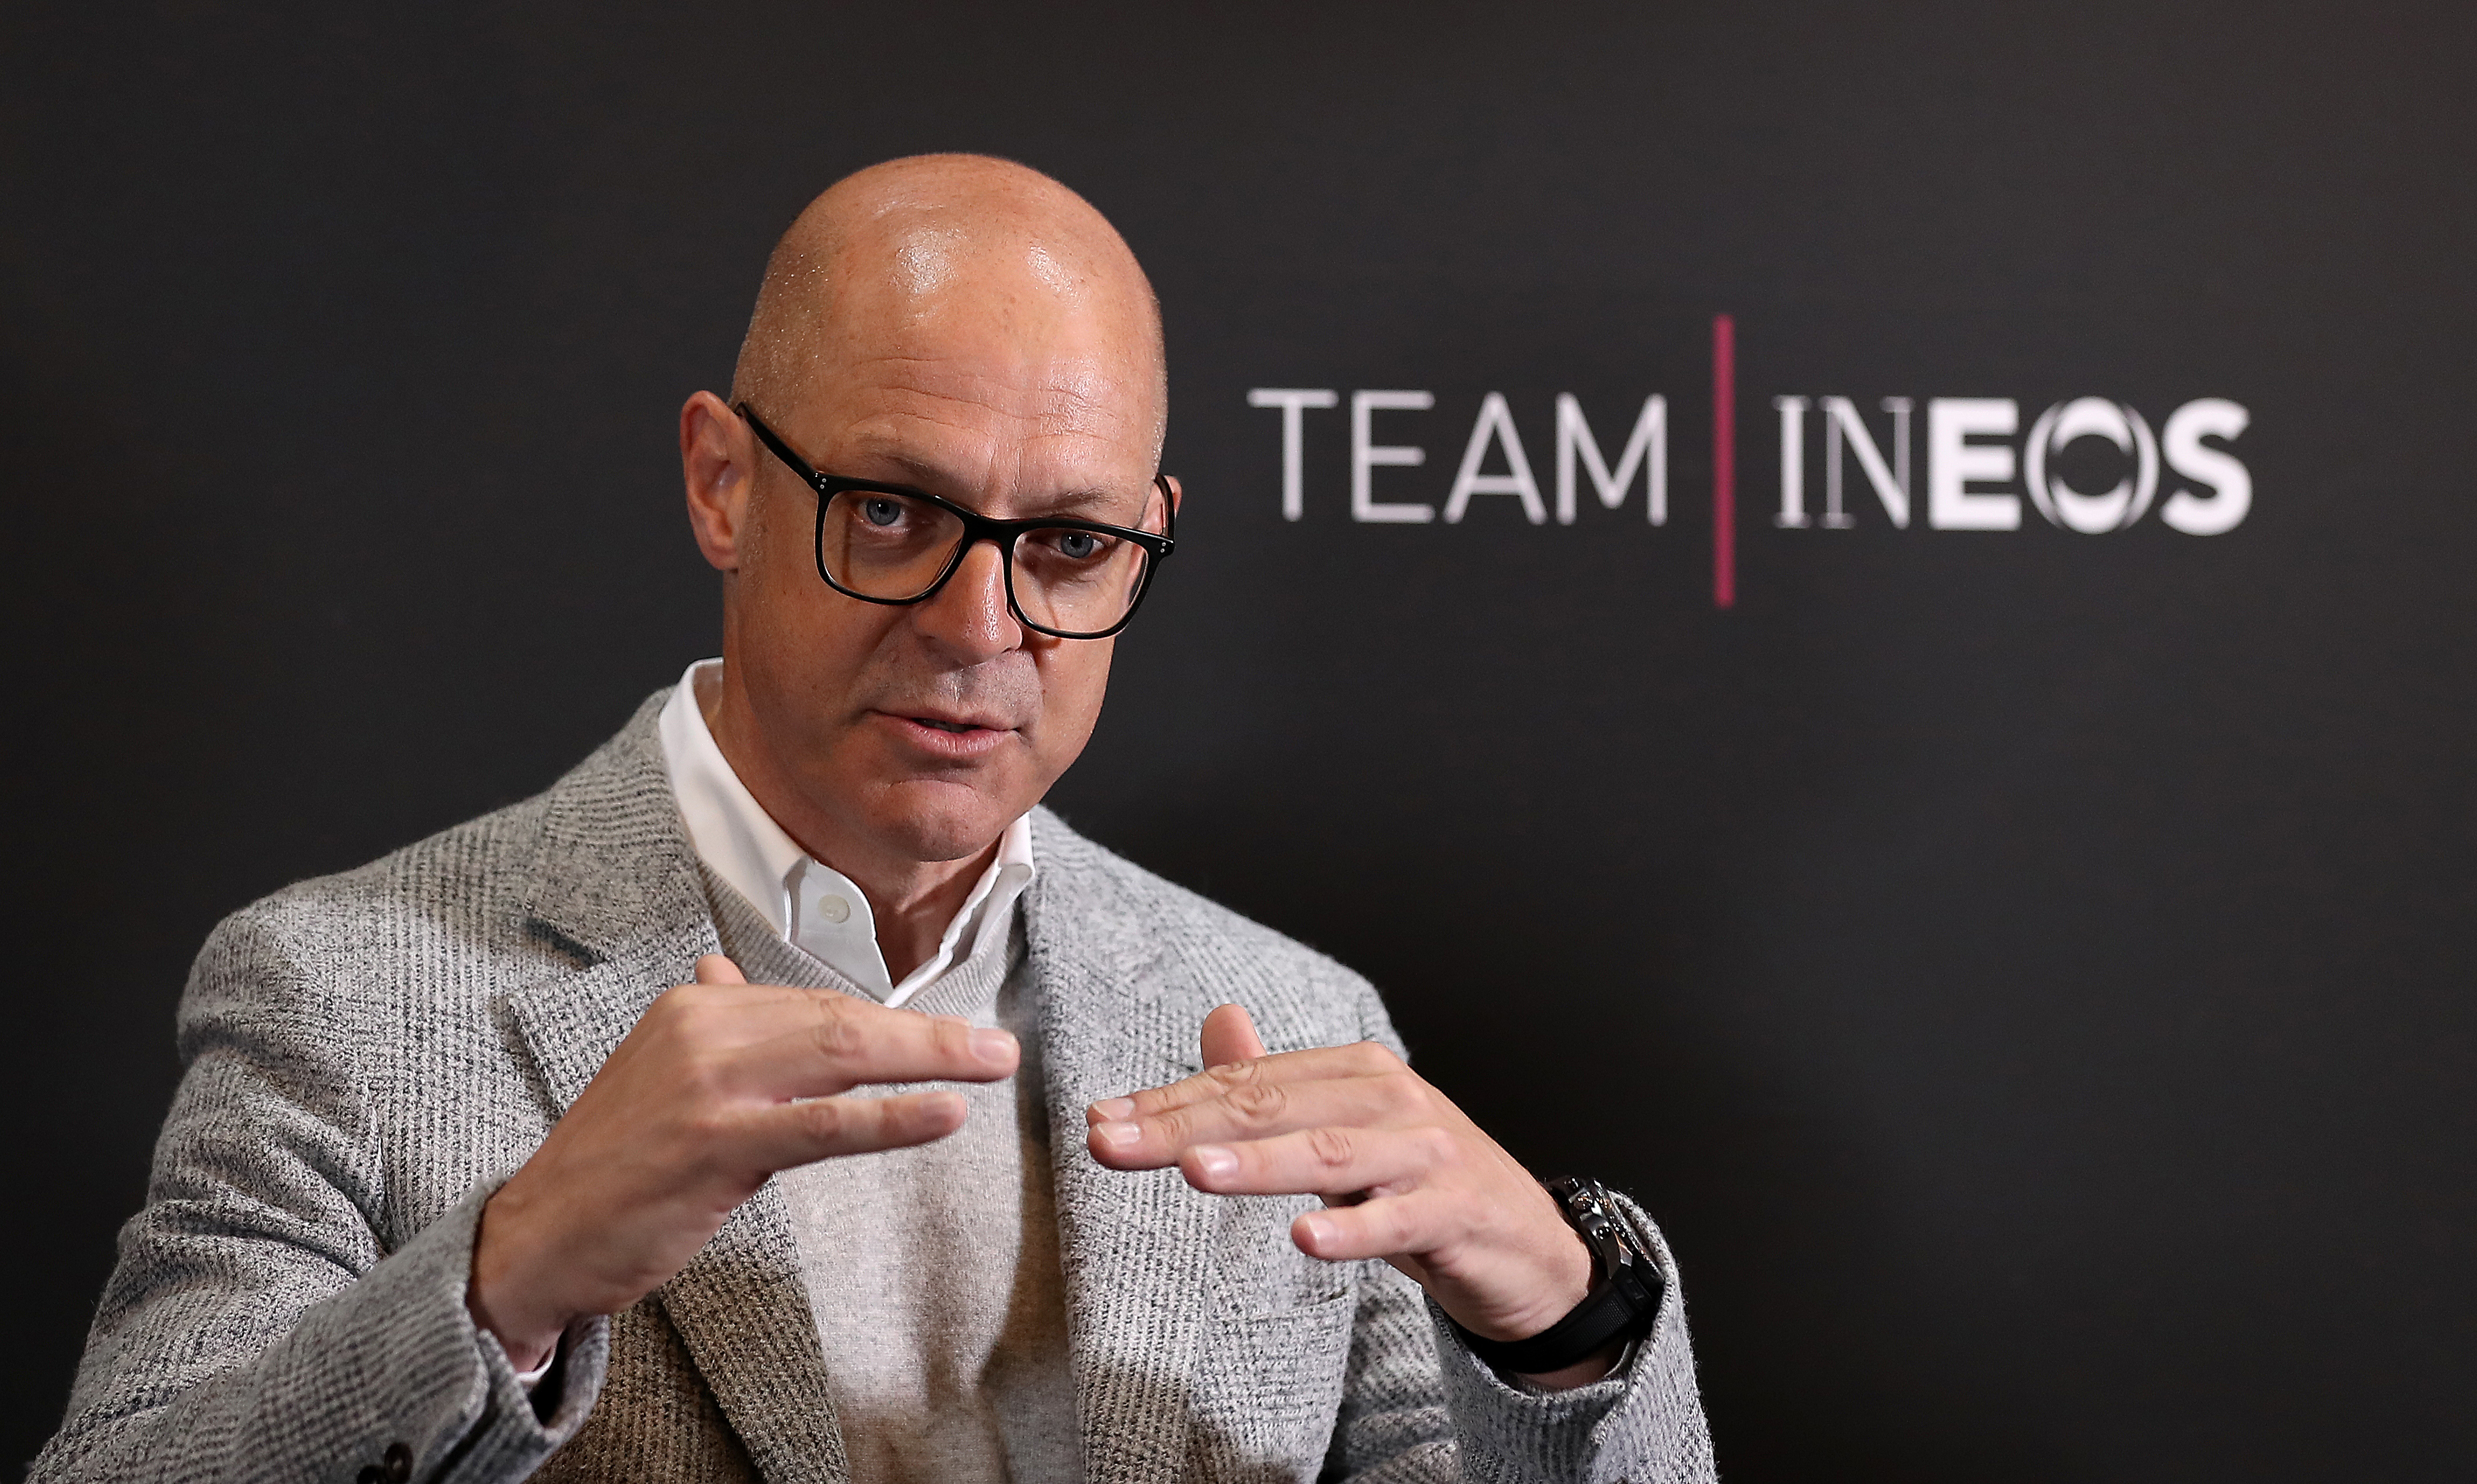 Sir Dave Brailsford during a Team INEOS press conference